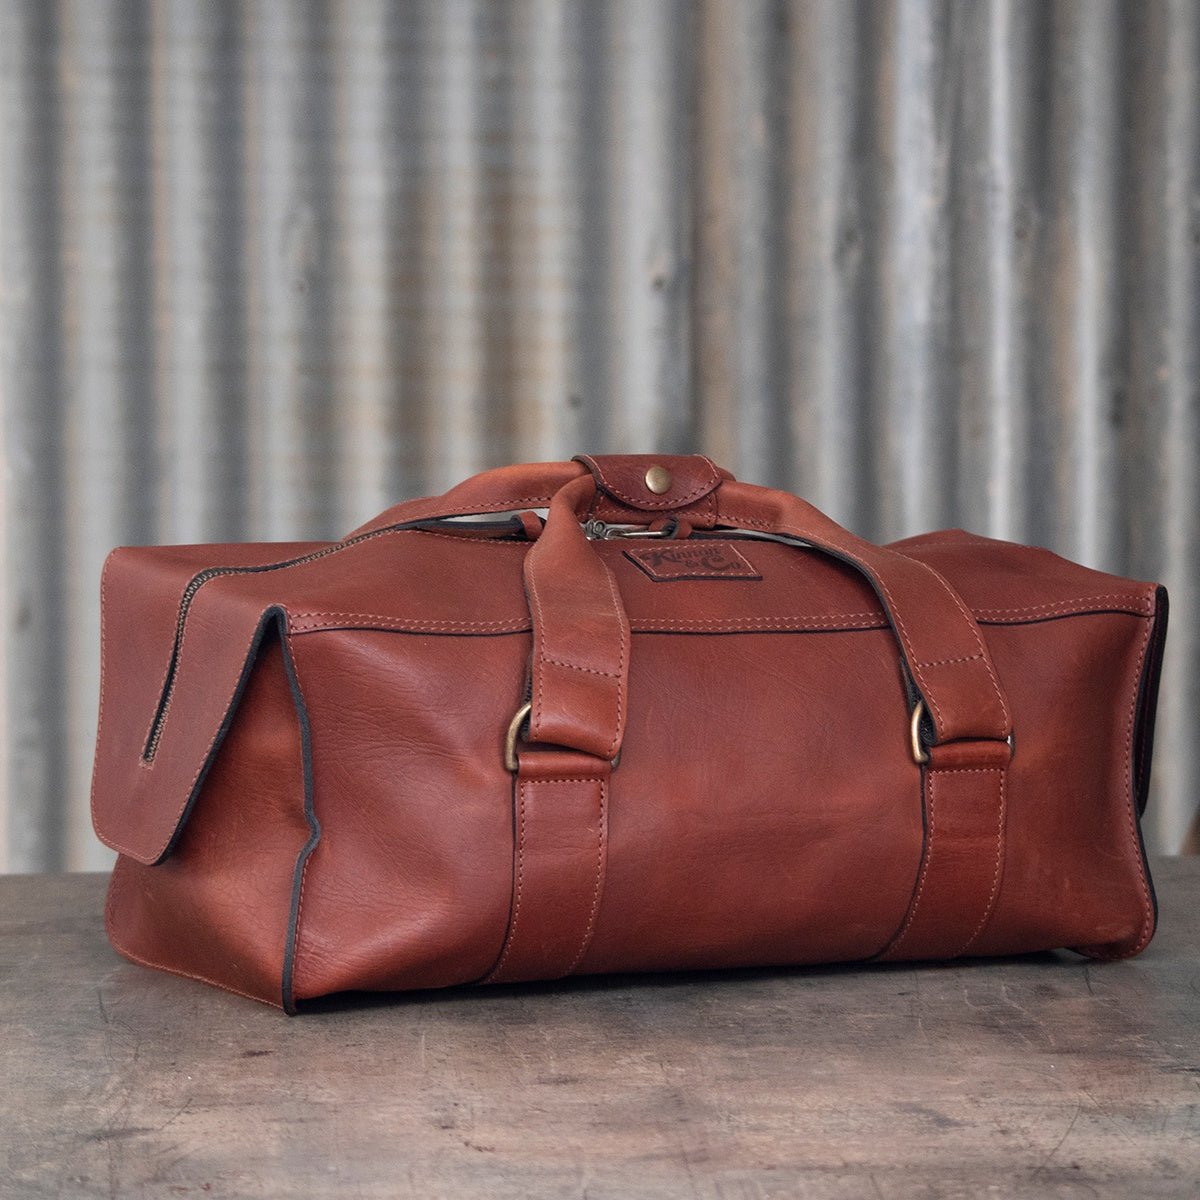 Kinnon and Co branded Small Tan Leather Weekender Bag.